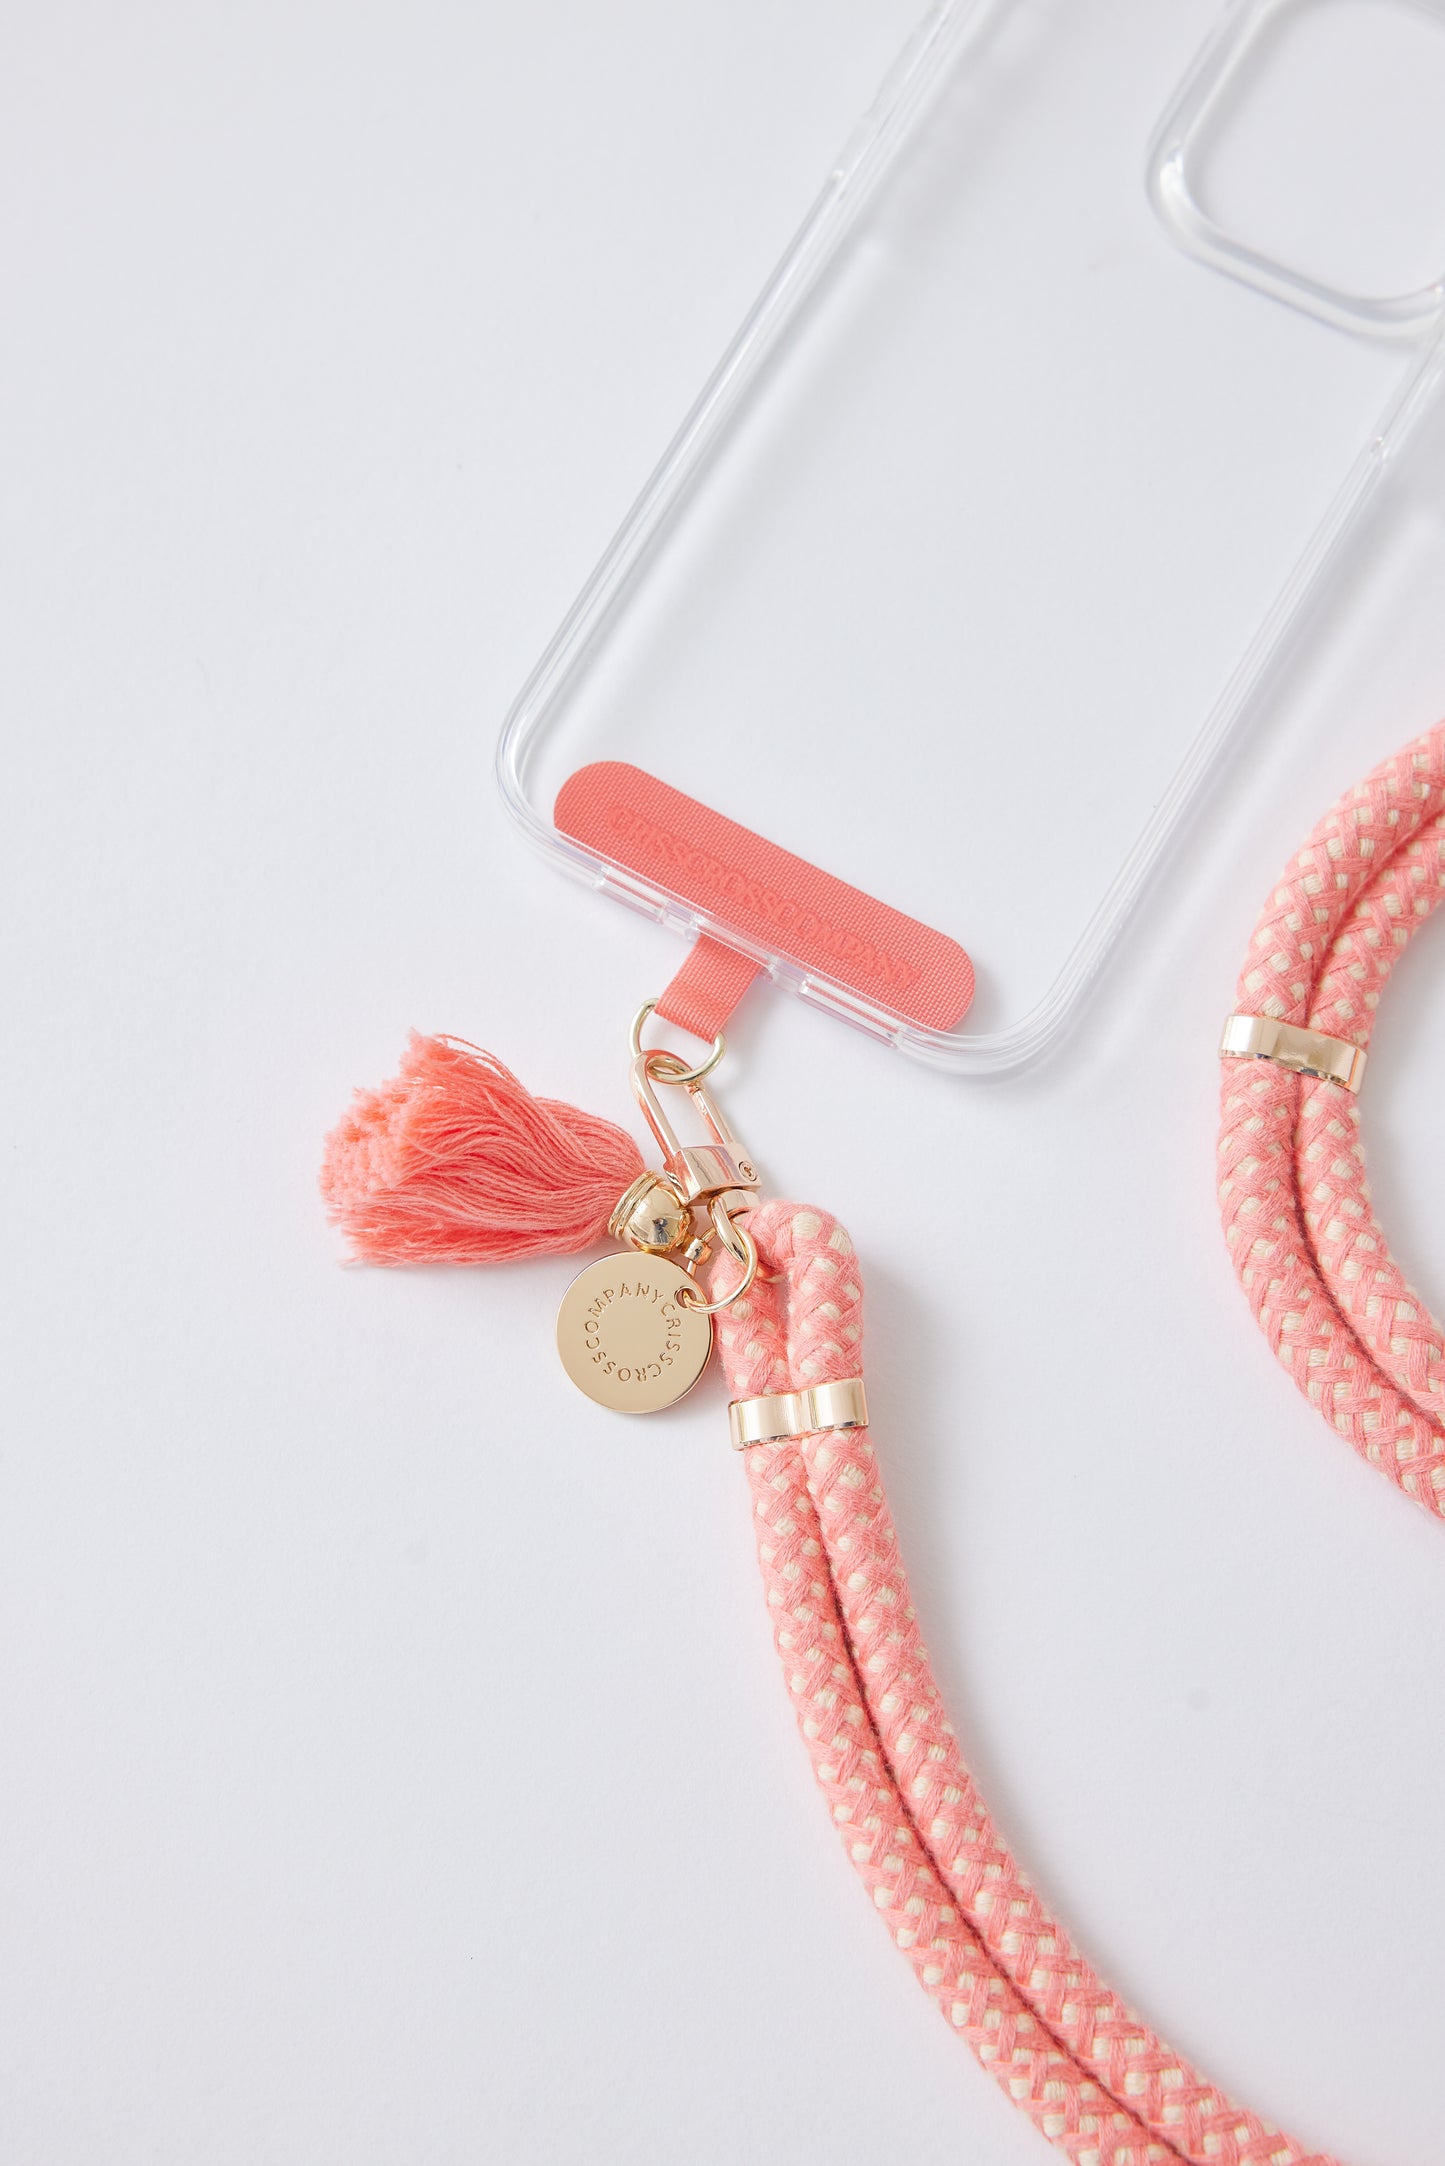 Cotton Phone Straps - one Carabiner with Universal Phone Patch